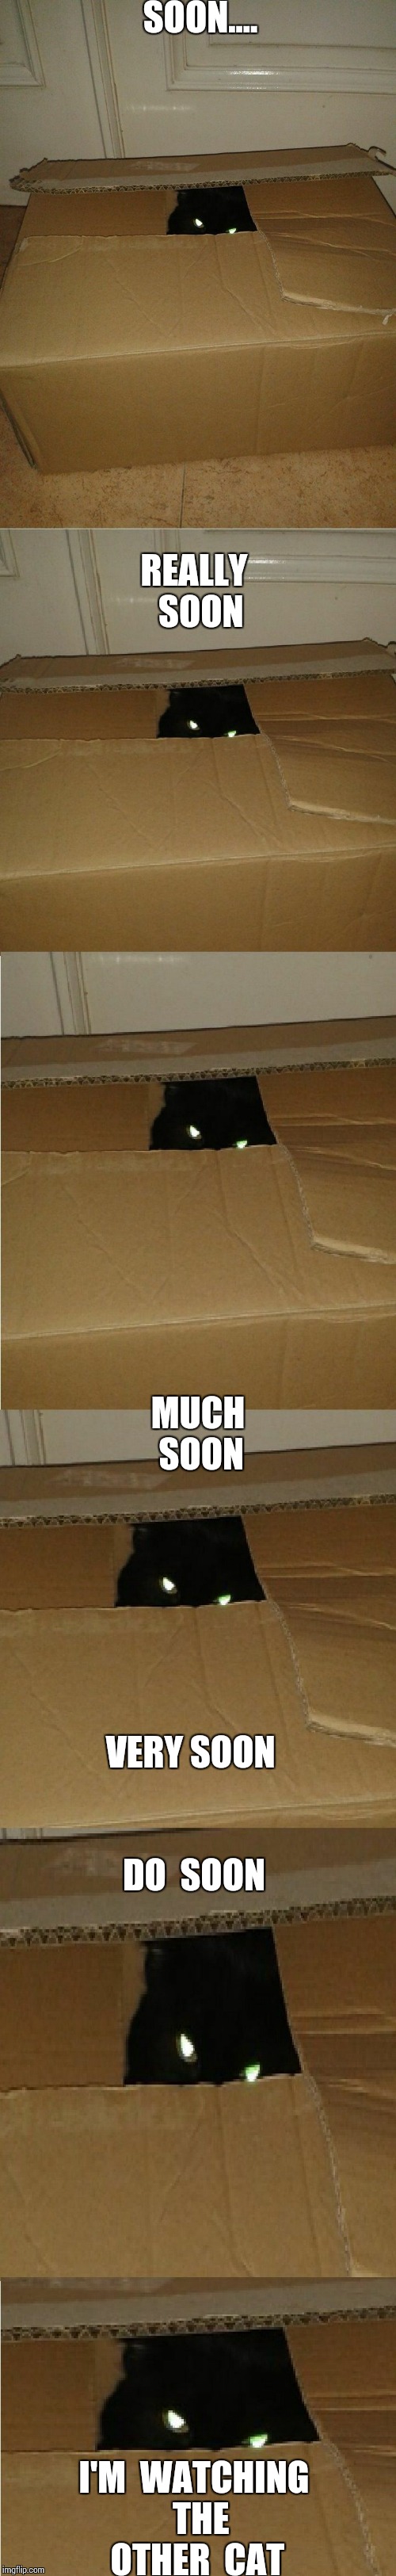 Soon | SOON.... REALLY  SOON; MUCH  SOON; VERY SOON; DO  SOON; I'M  WATCHING  THE OTHER  CAT | image tagged in soon | made w/ Imgflip meme maker